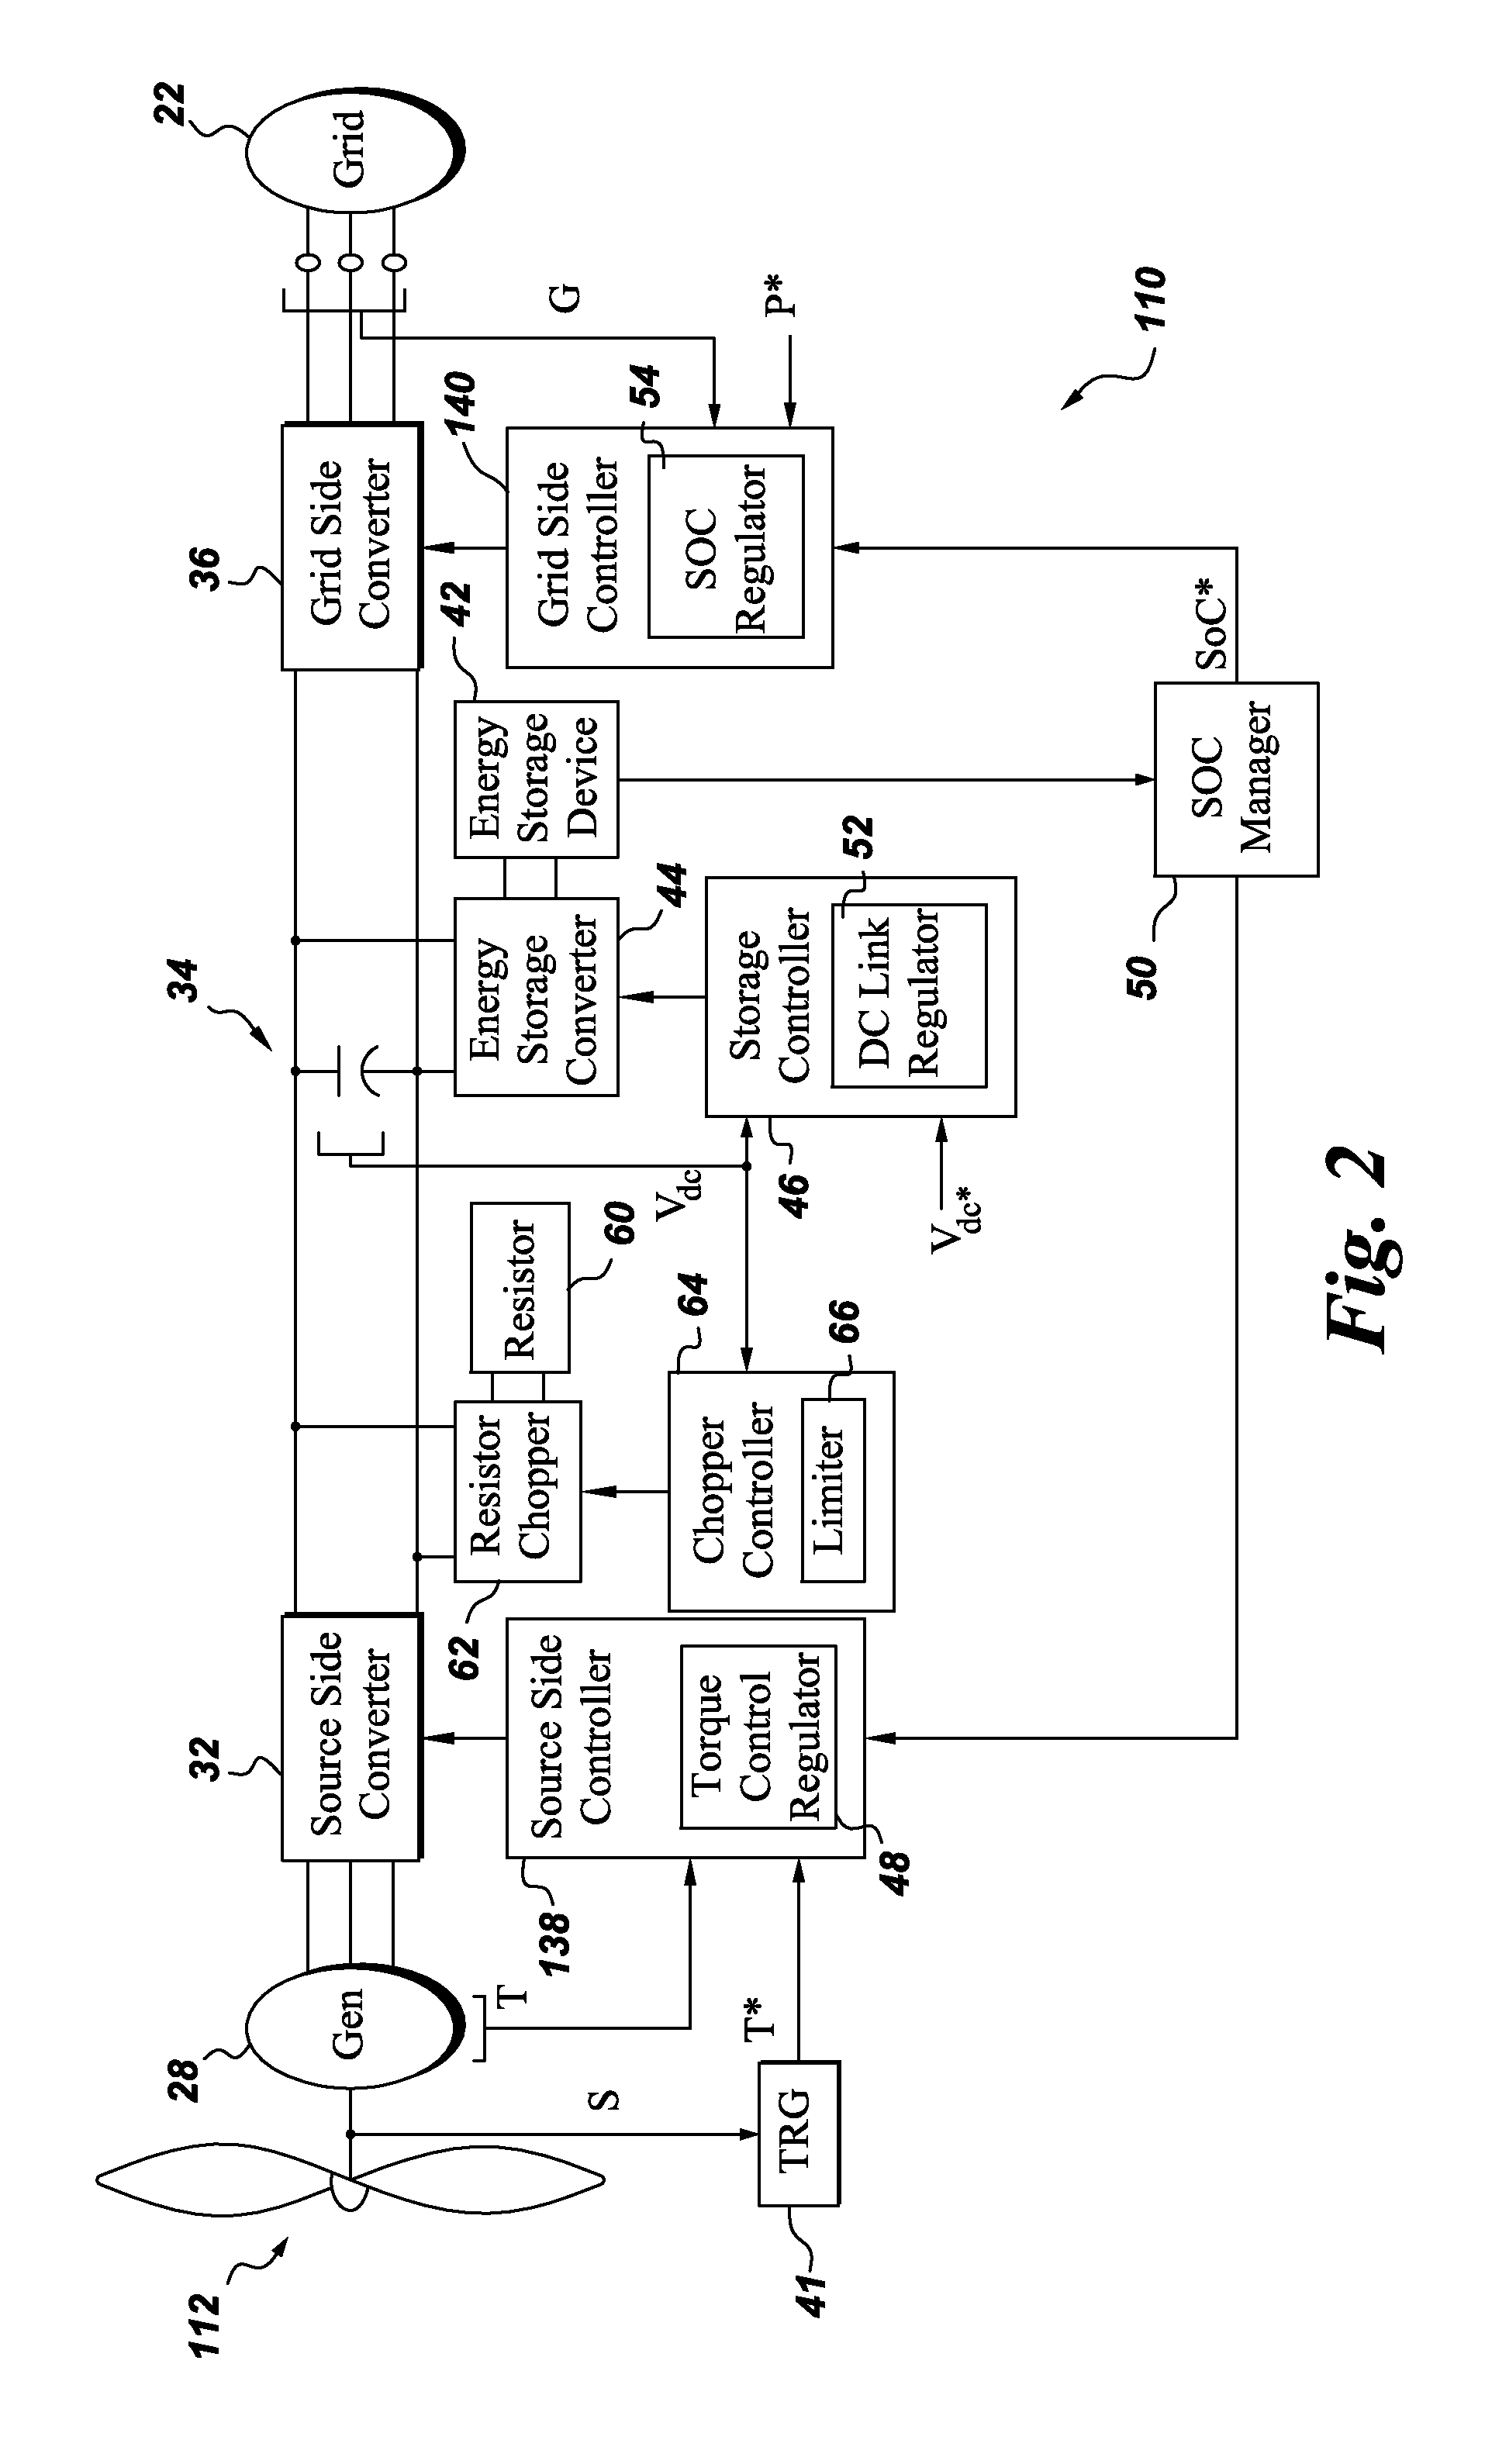 Power conversion control with energy storage